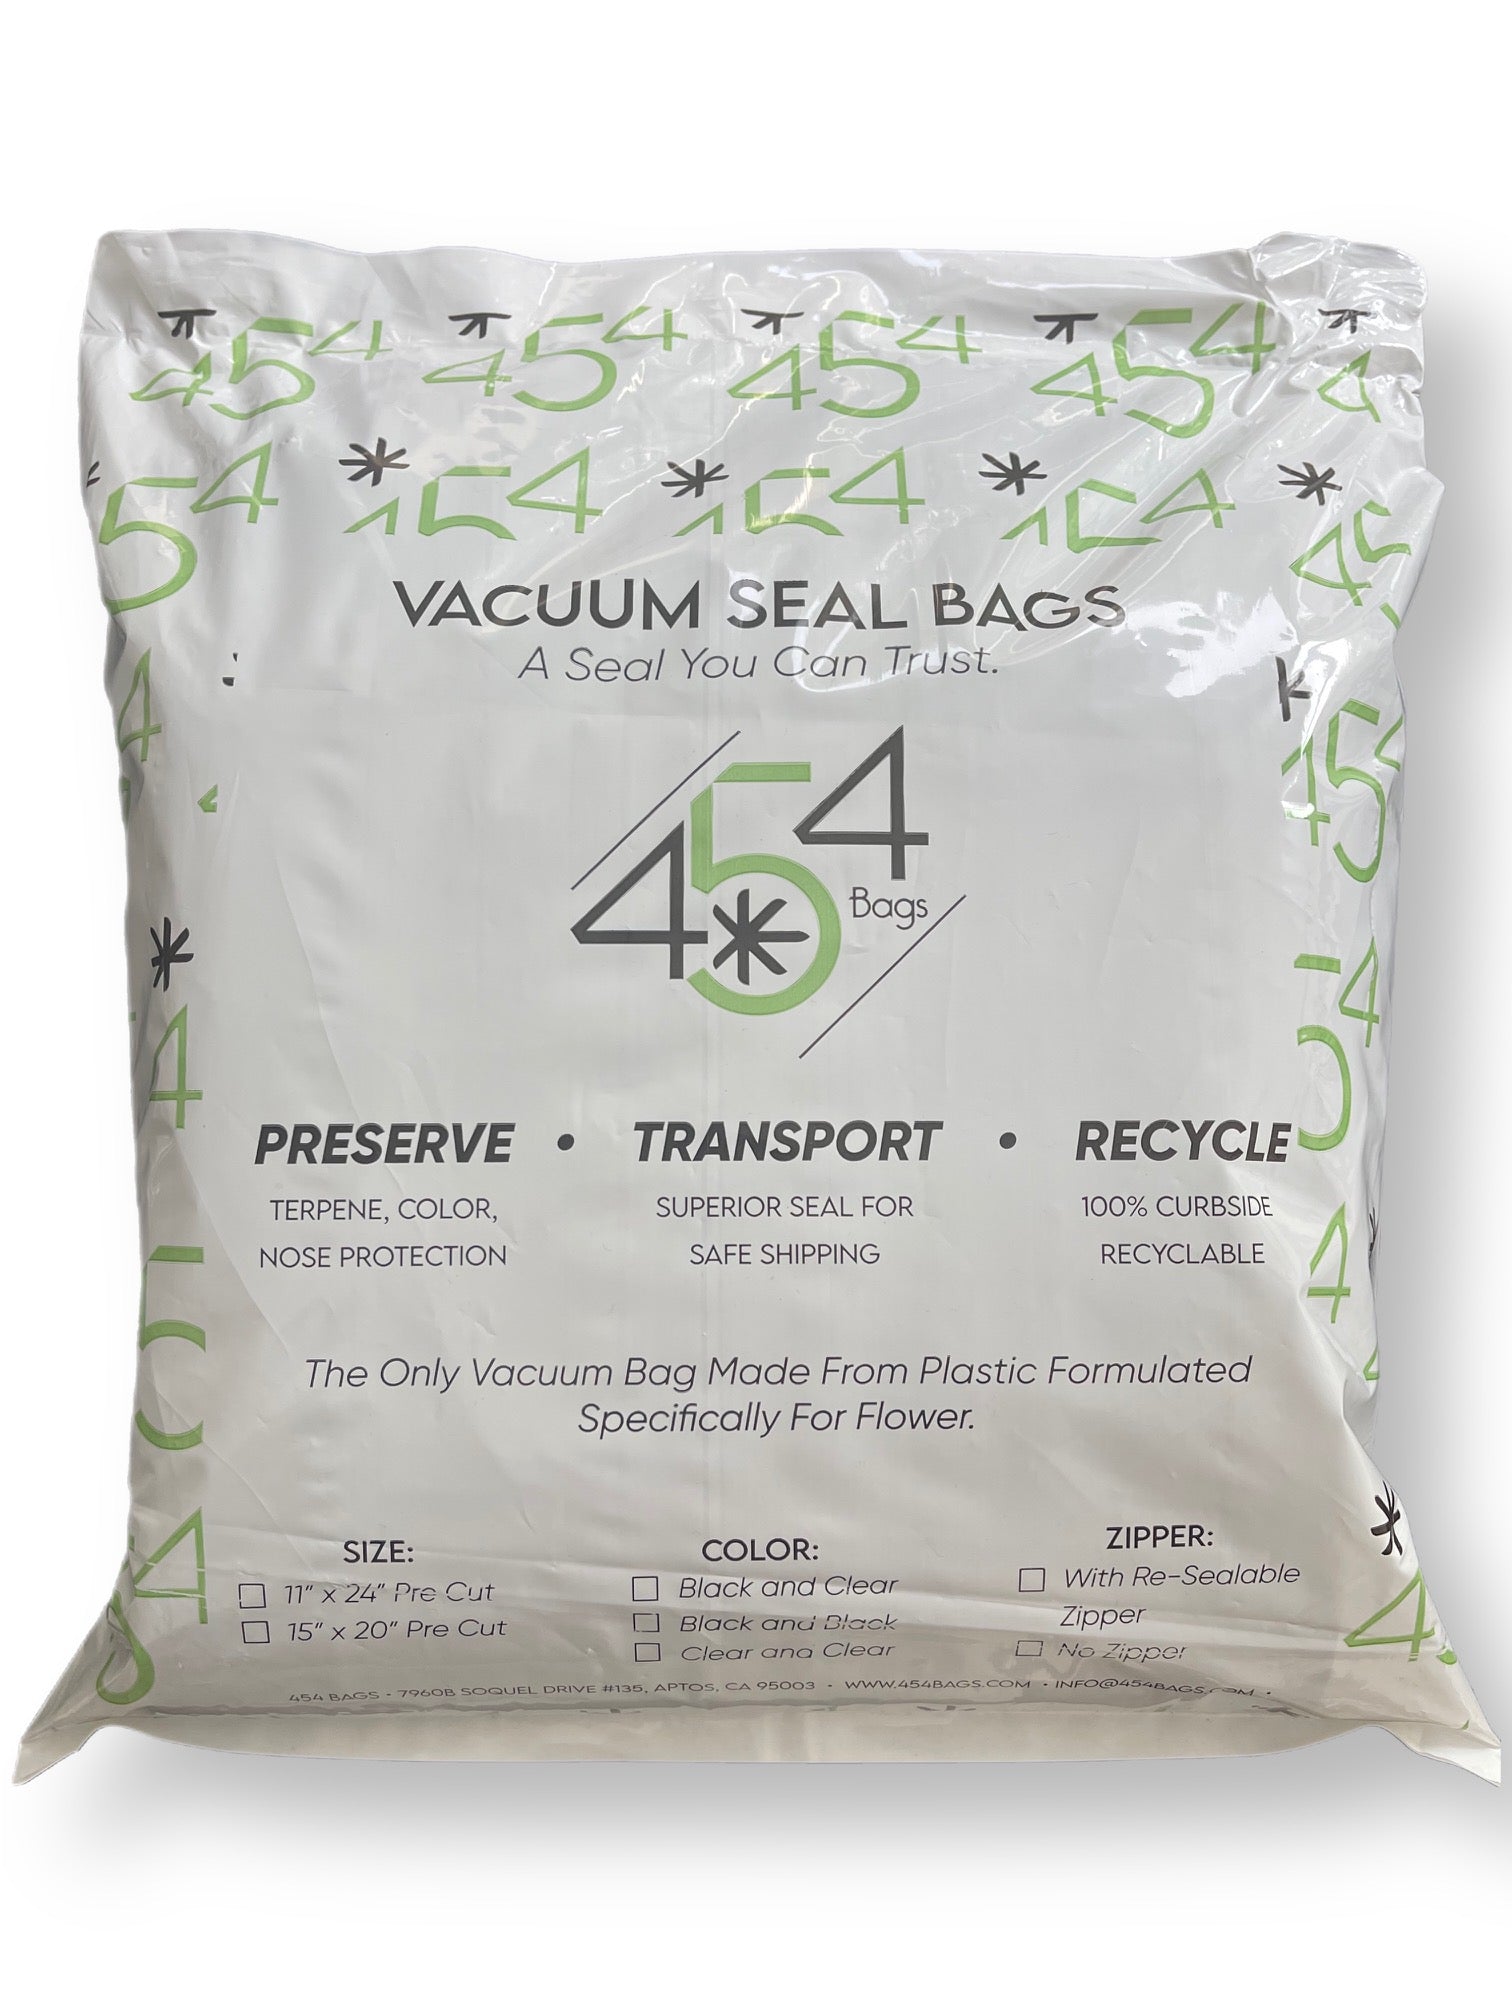 Packaging of the 454 Vacuum Bags, emphasizing its proprietary plastic blend tailored for cannabis. Highlights its unique features like enhanced seal strength, oxygen barrier, and puncture resistance.